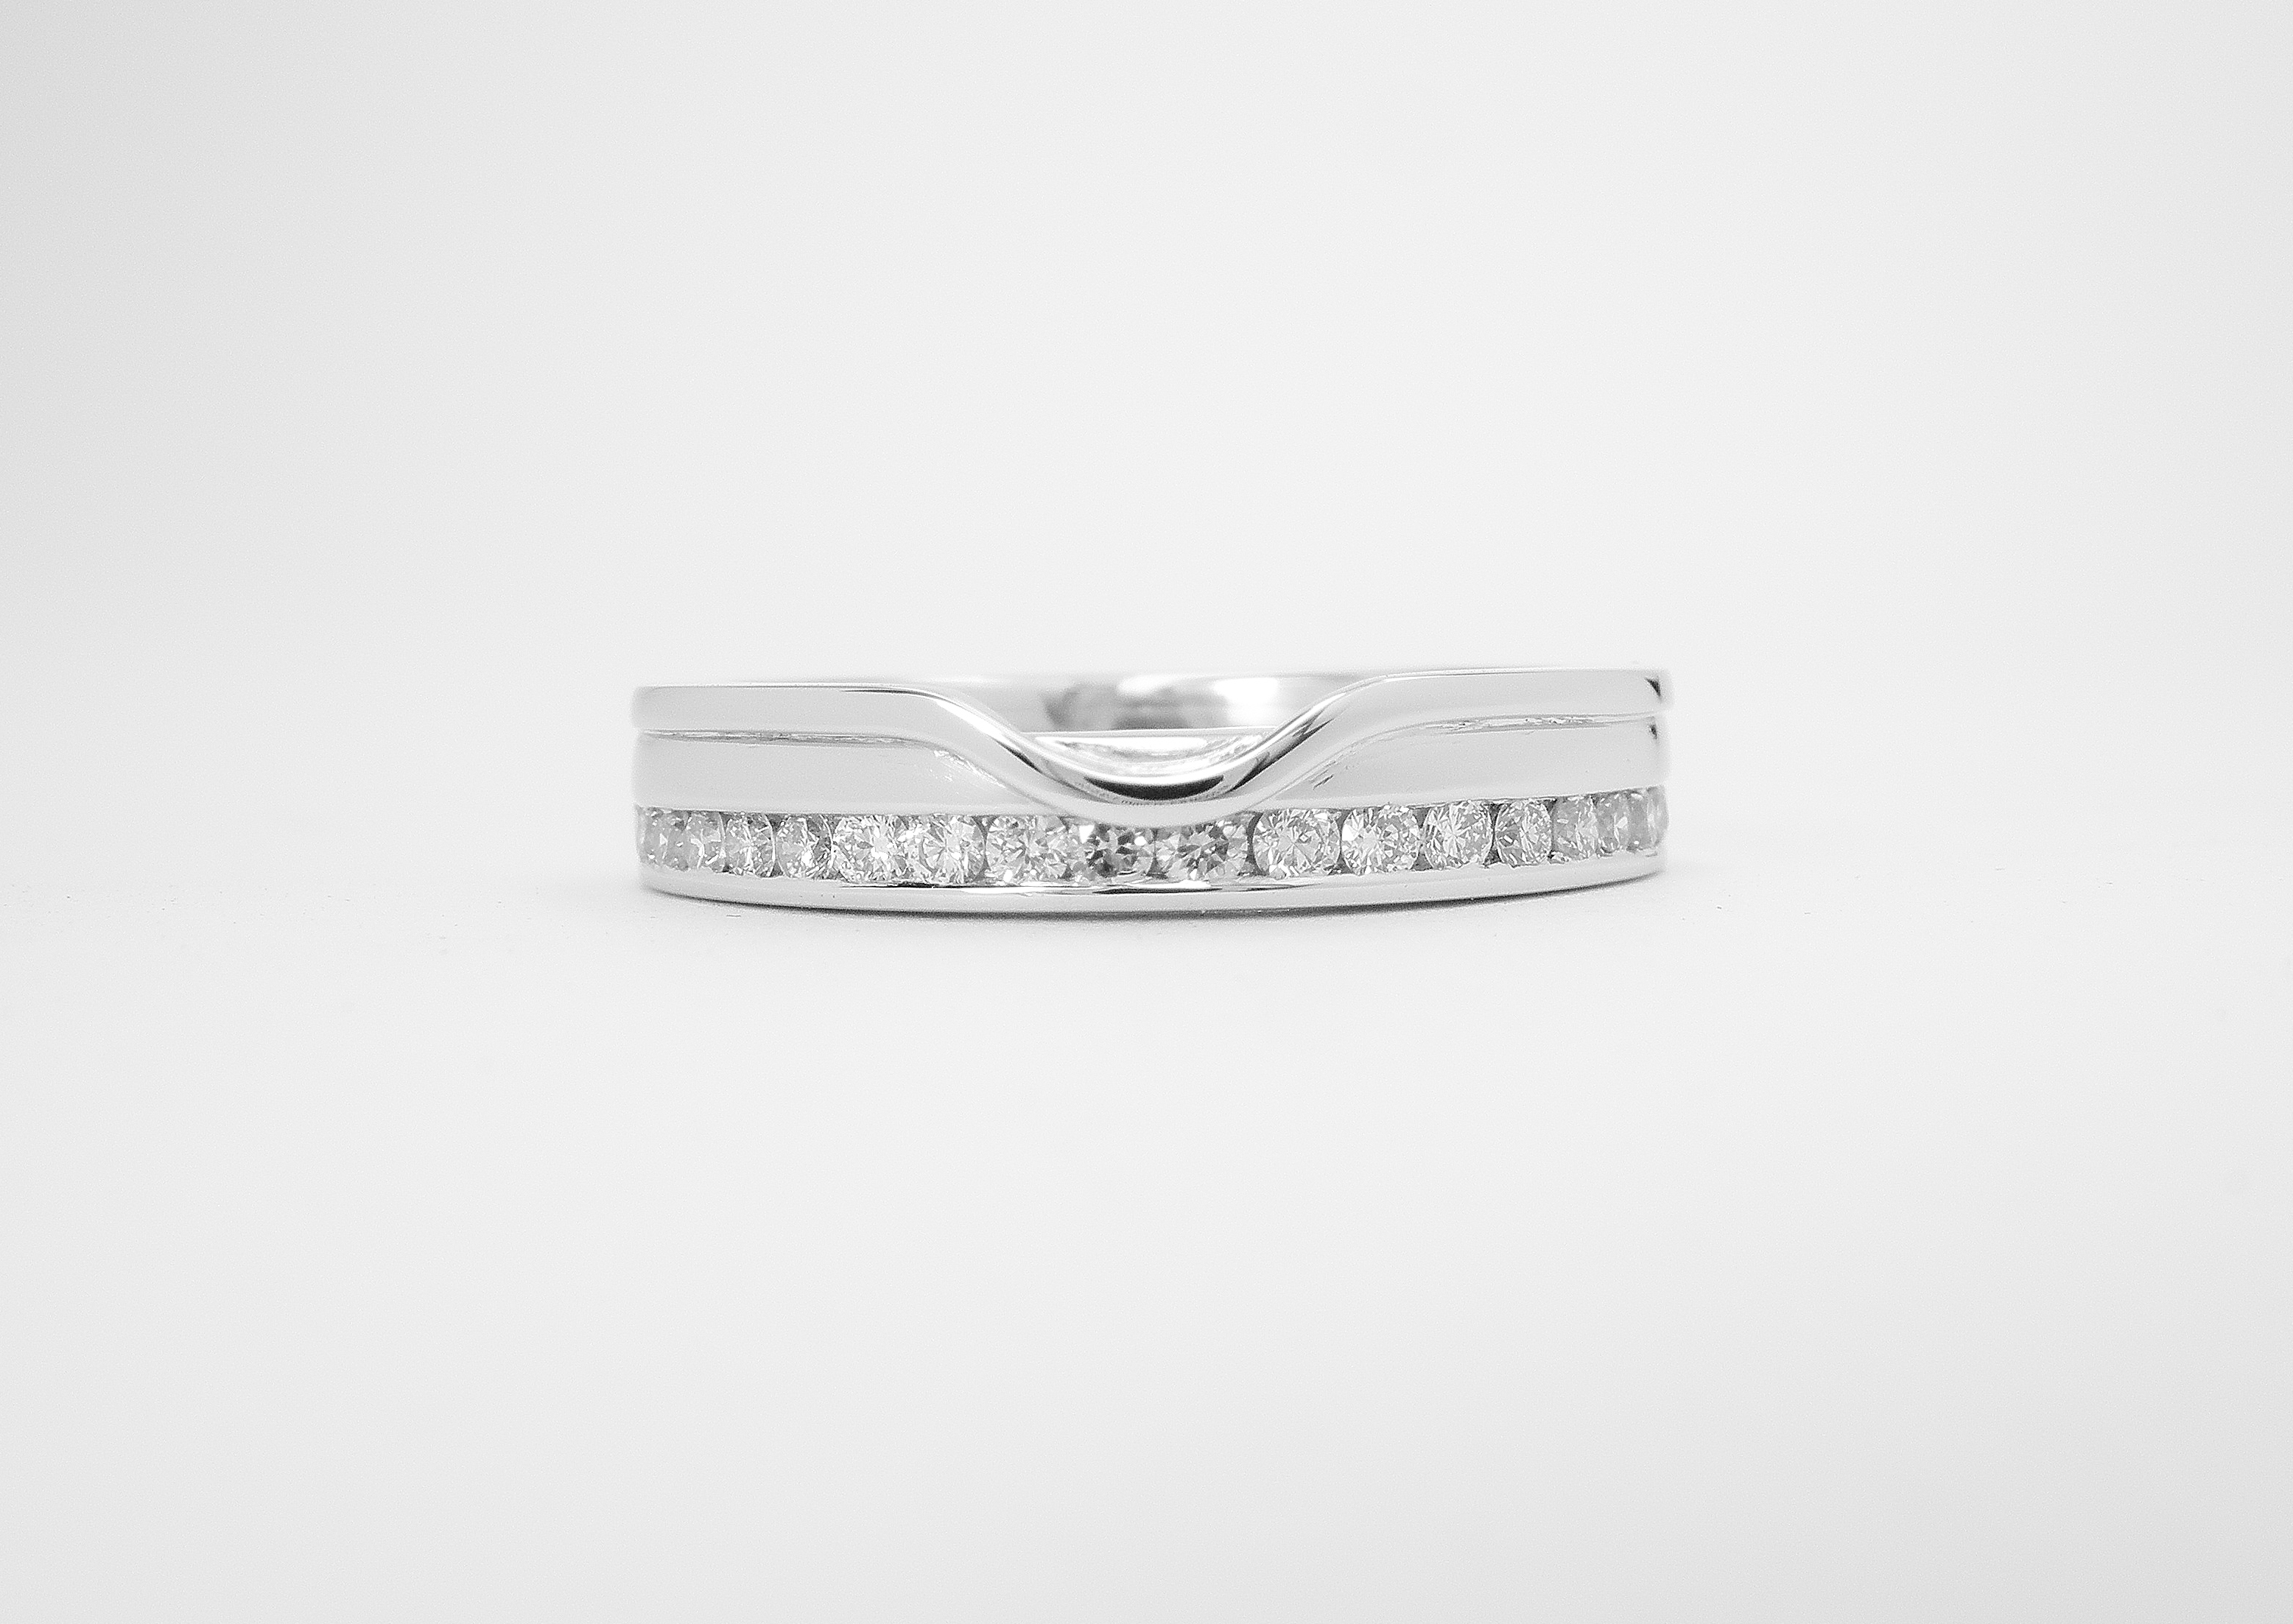 18ct. white gold 'Off-set' diamond wedding ring shaped to fit with a single stone straight diamond engagement ring.